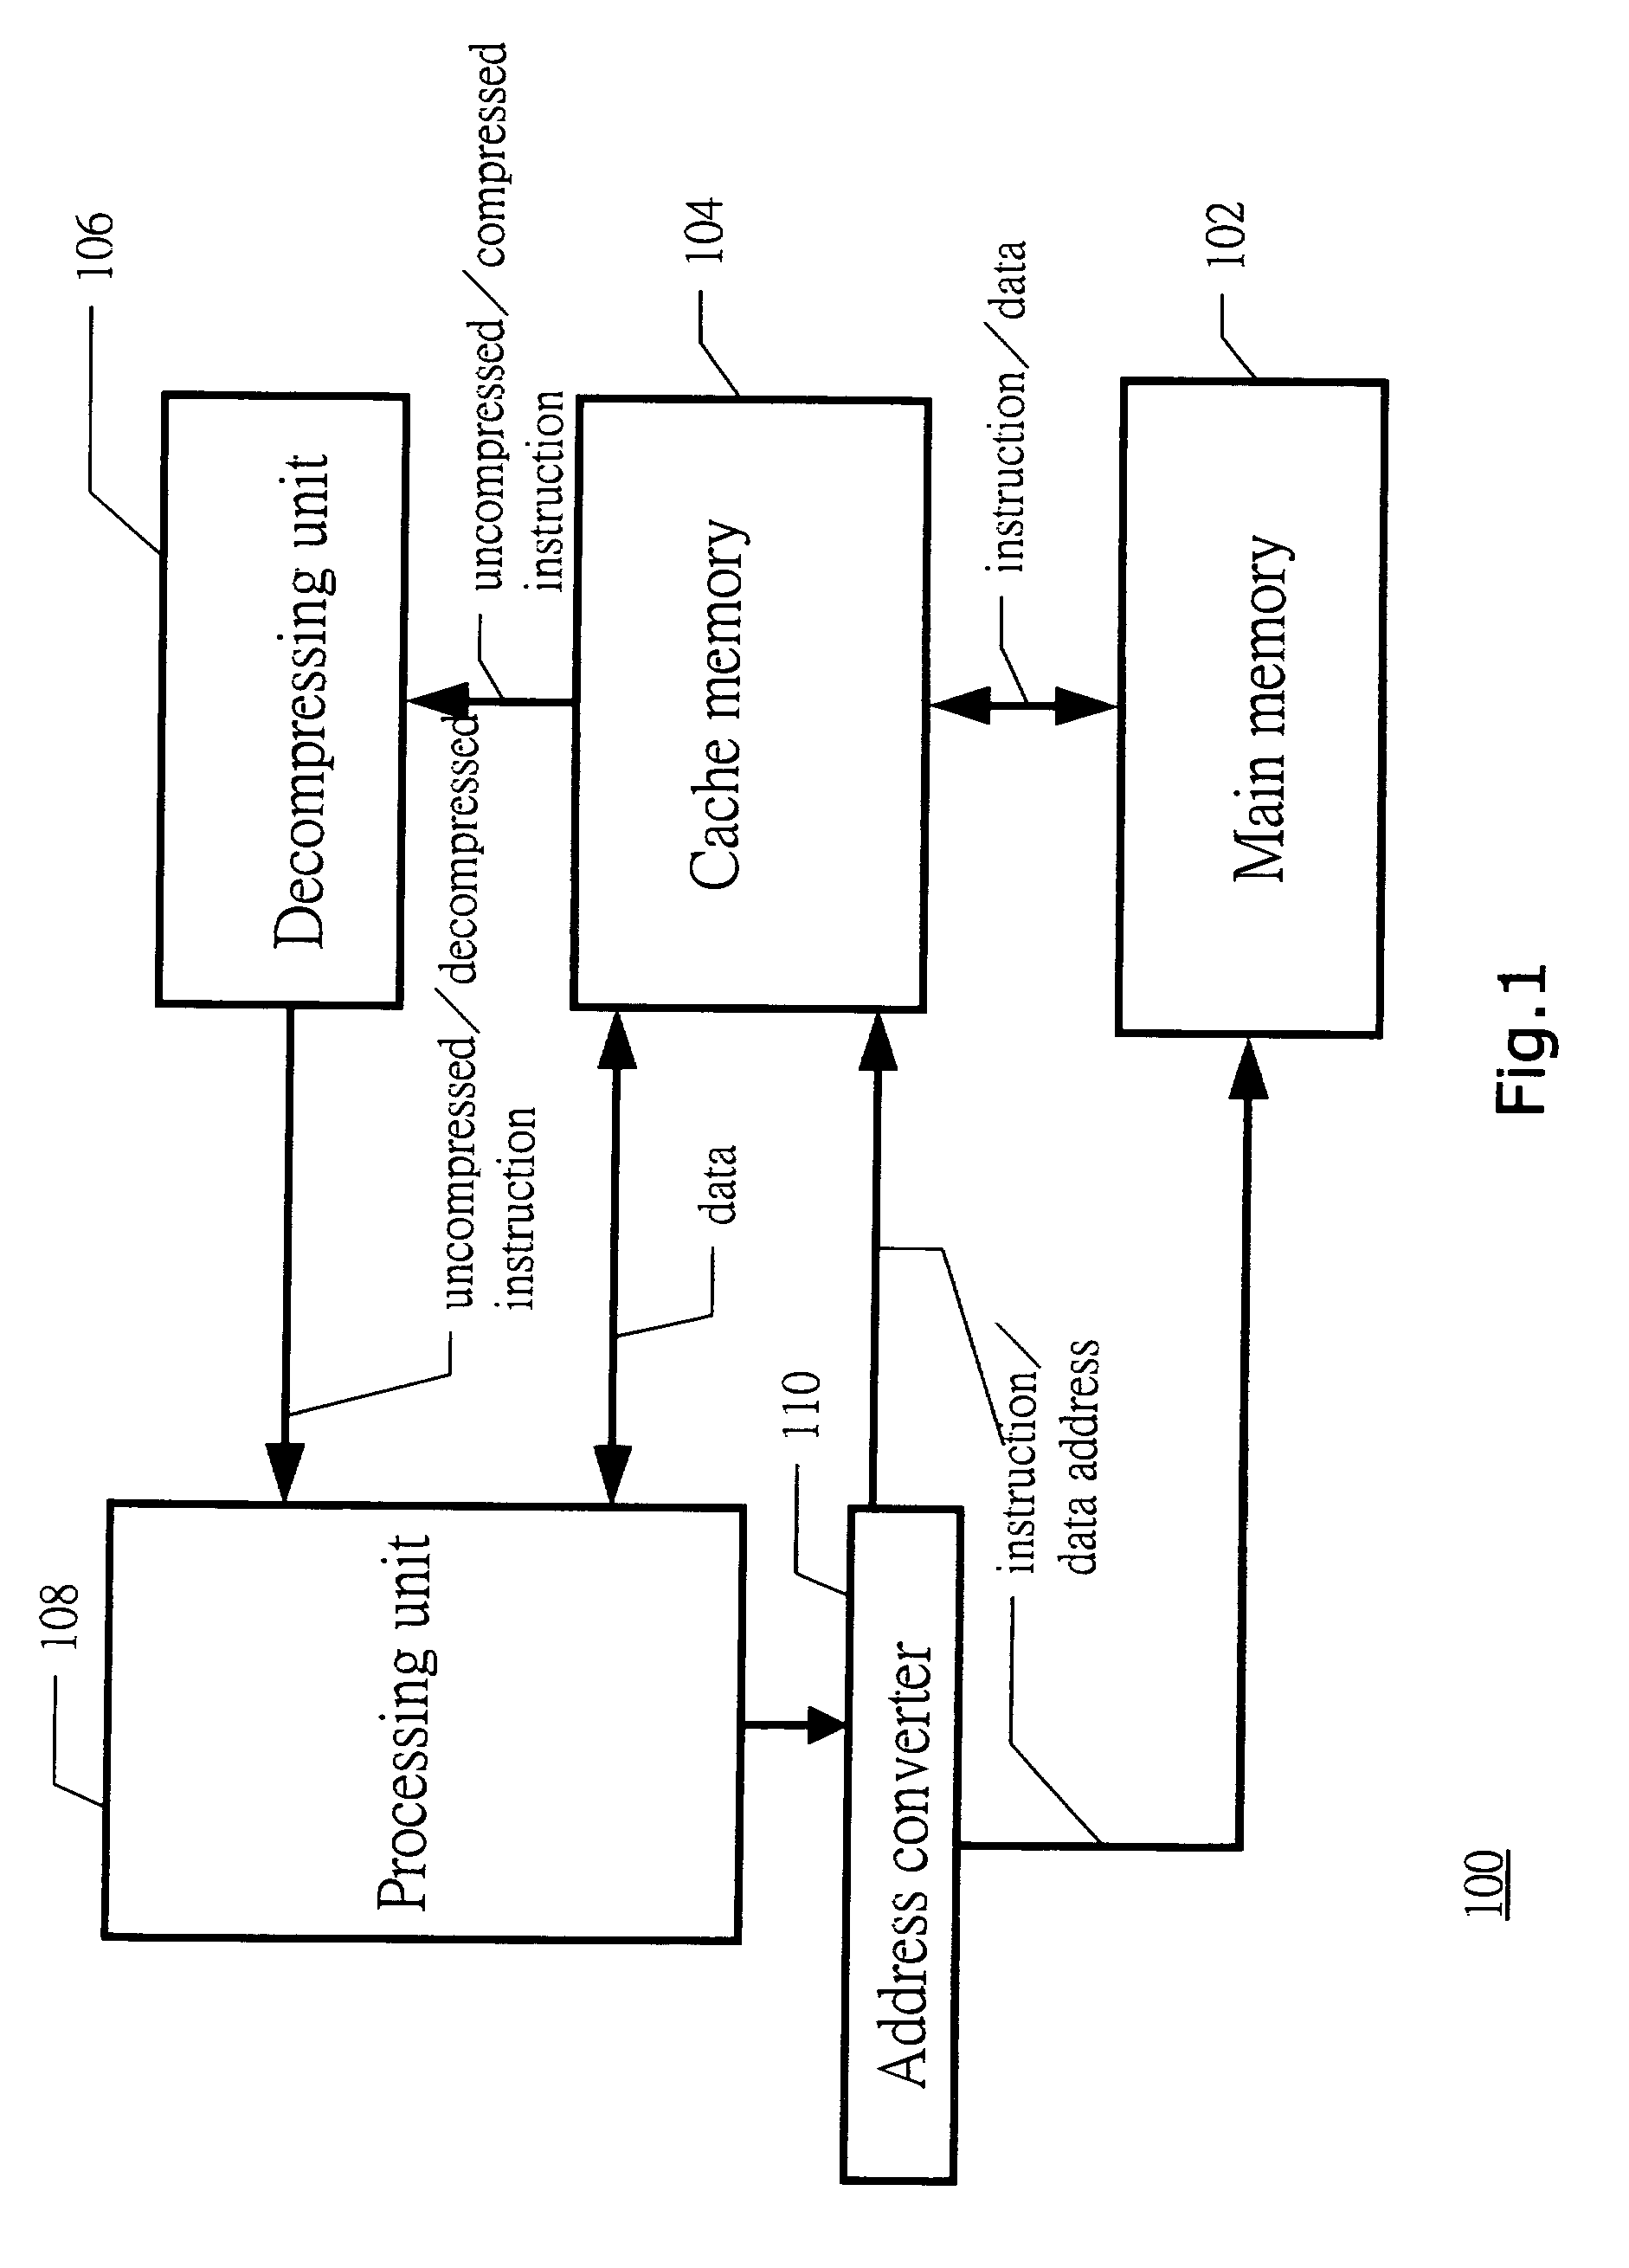 Maintaining original per-block number of instructions by inserting NOPs among compressed instructions in compressed block of length compressed by predetermined ratio